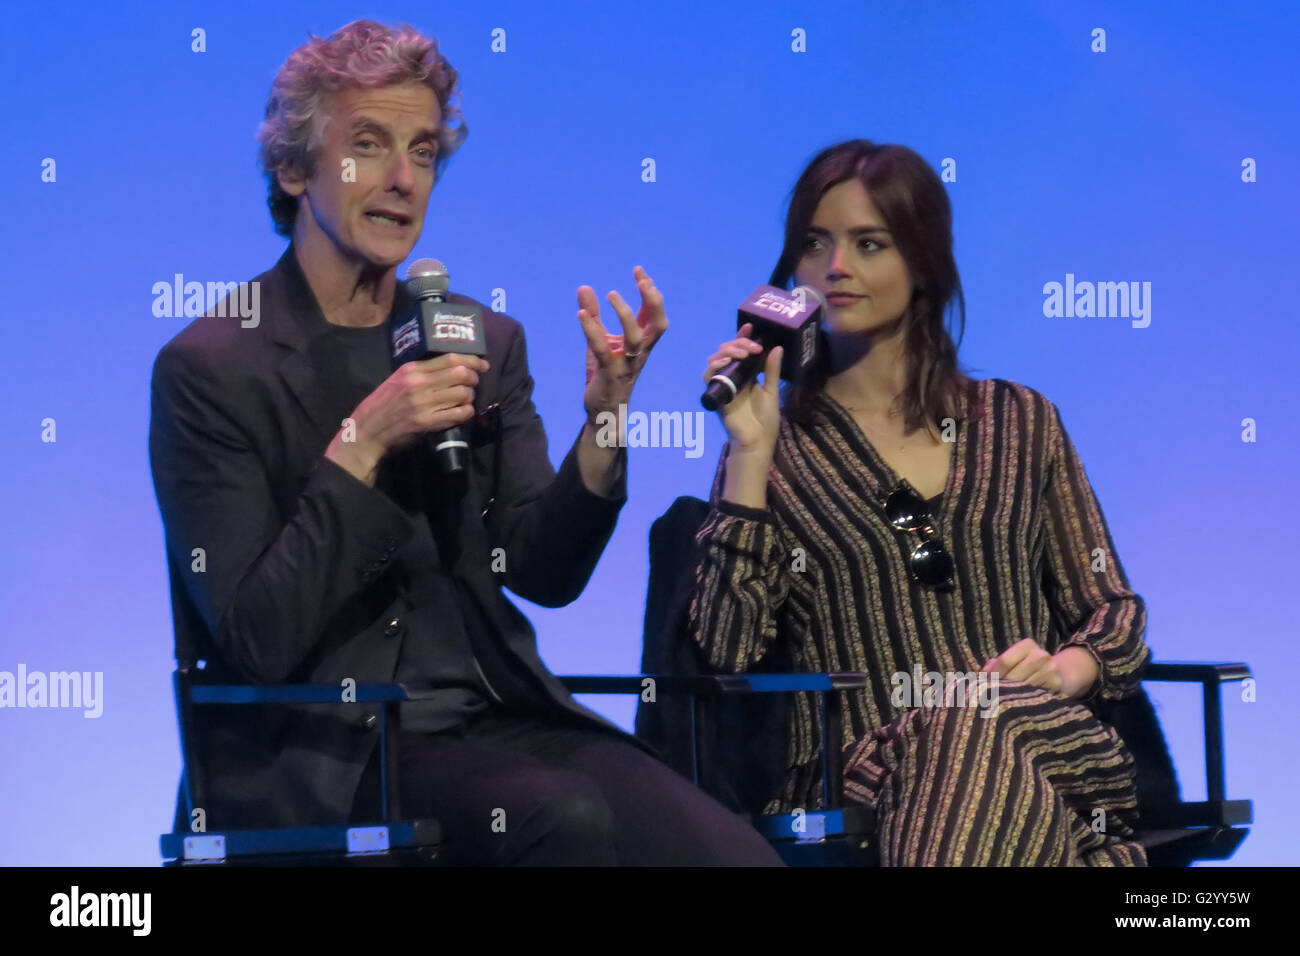 Washington, DC, USA. 5th June, 2016. Doctor Who's Peter Capaldi (the Twelfth Doctor) answering a question as Jenna-Louise Coleman (Clara Oswald) listens at Awesome Con 2016, held in Washington, DC. Credit:  Evan Golub/ZUMA Wire/Alamy Live News Stock Photo